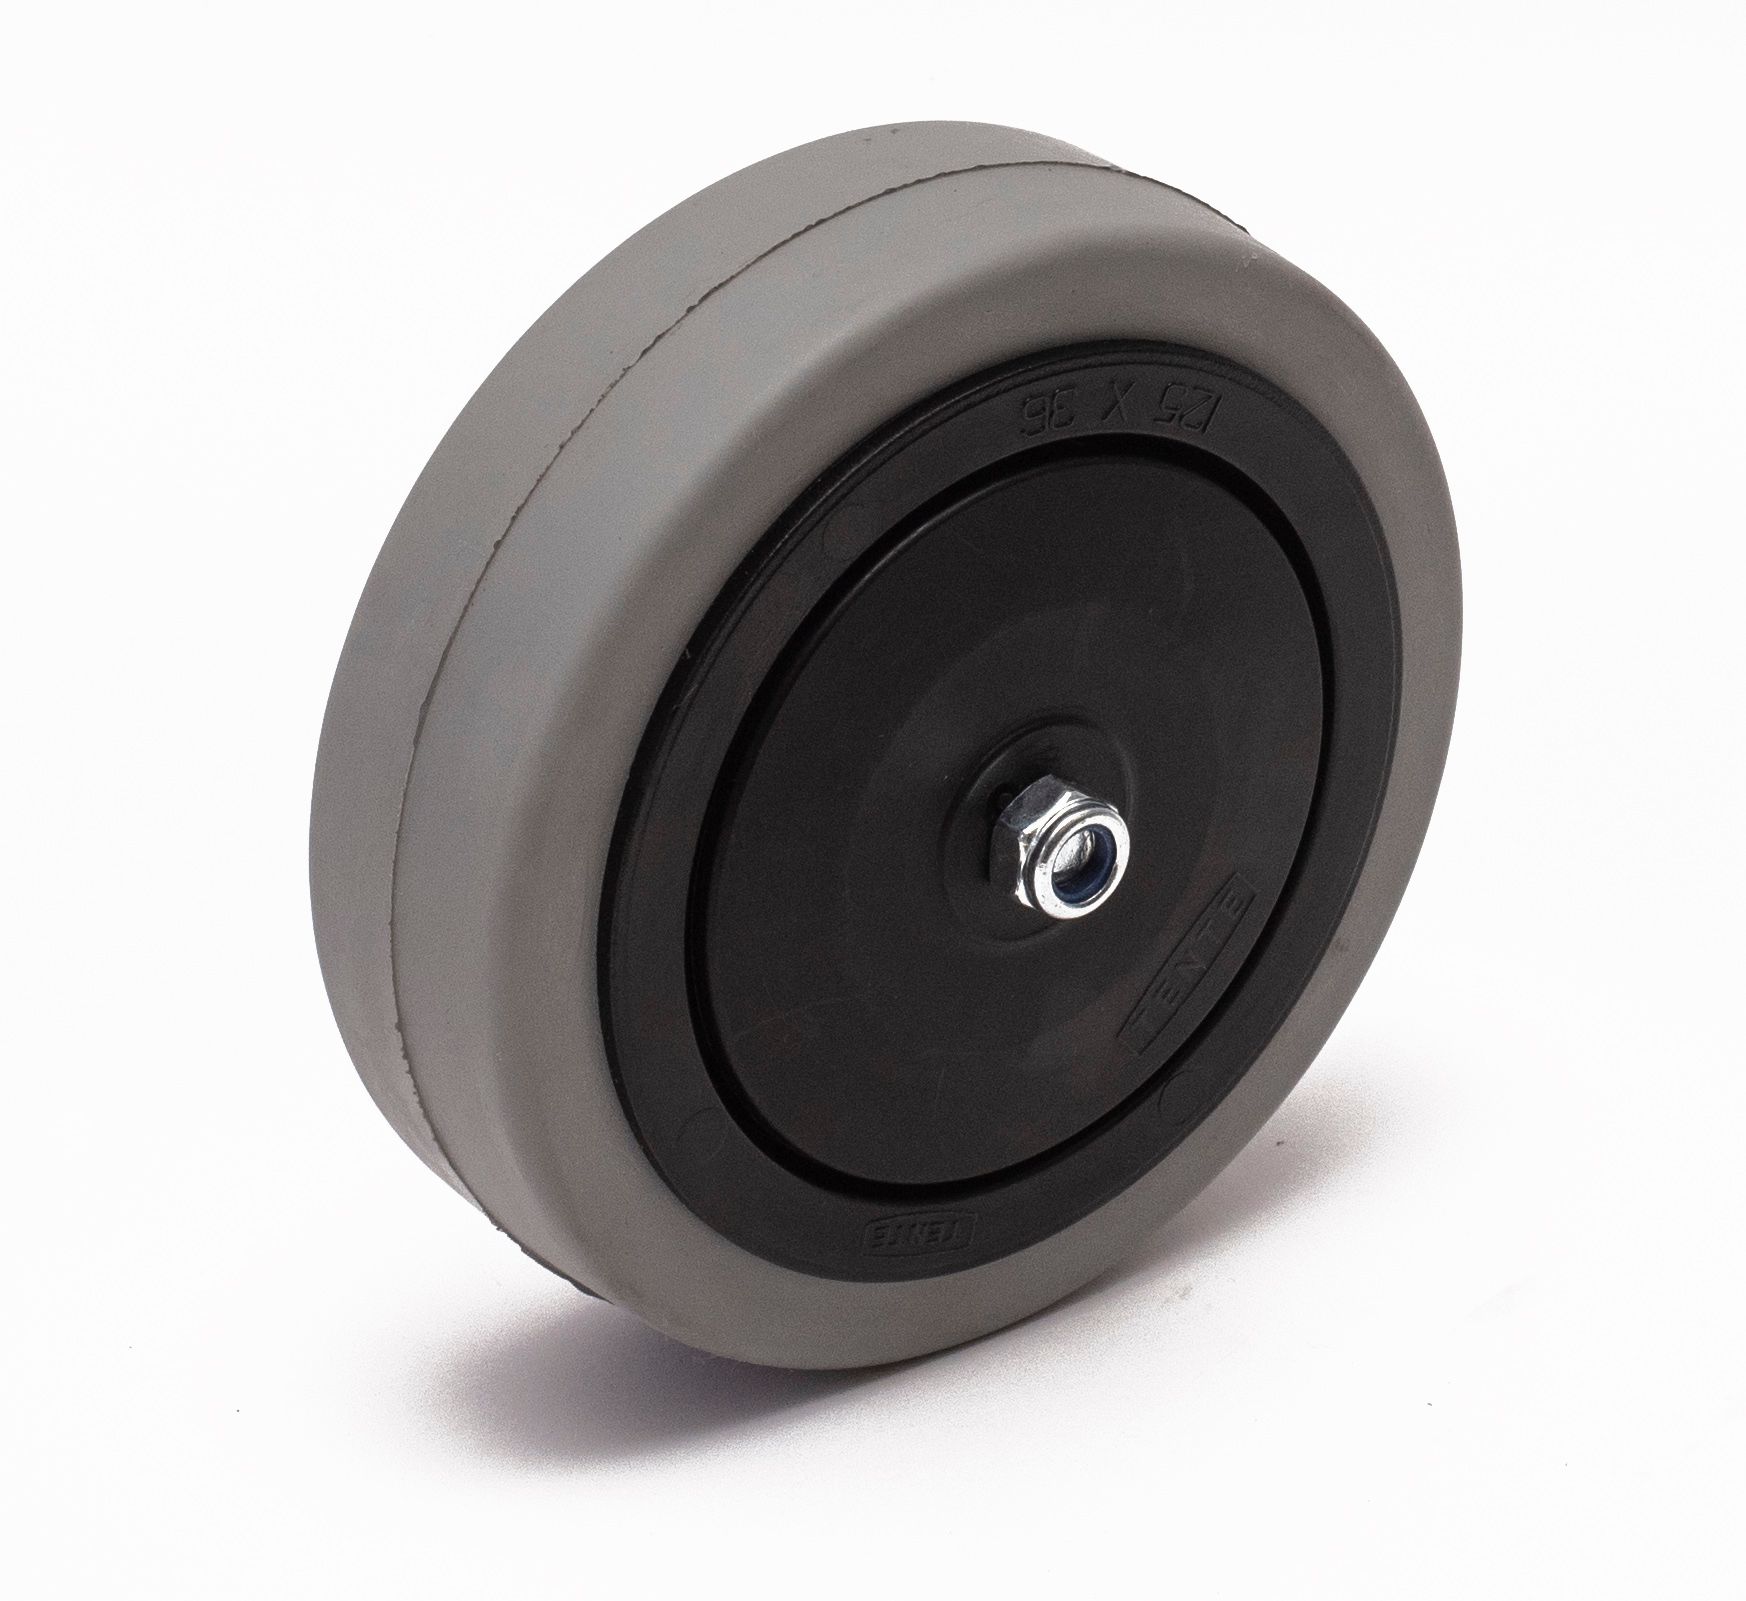 UFP – Elastic rubber with precision bearing castor wheel